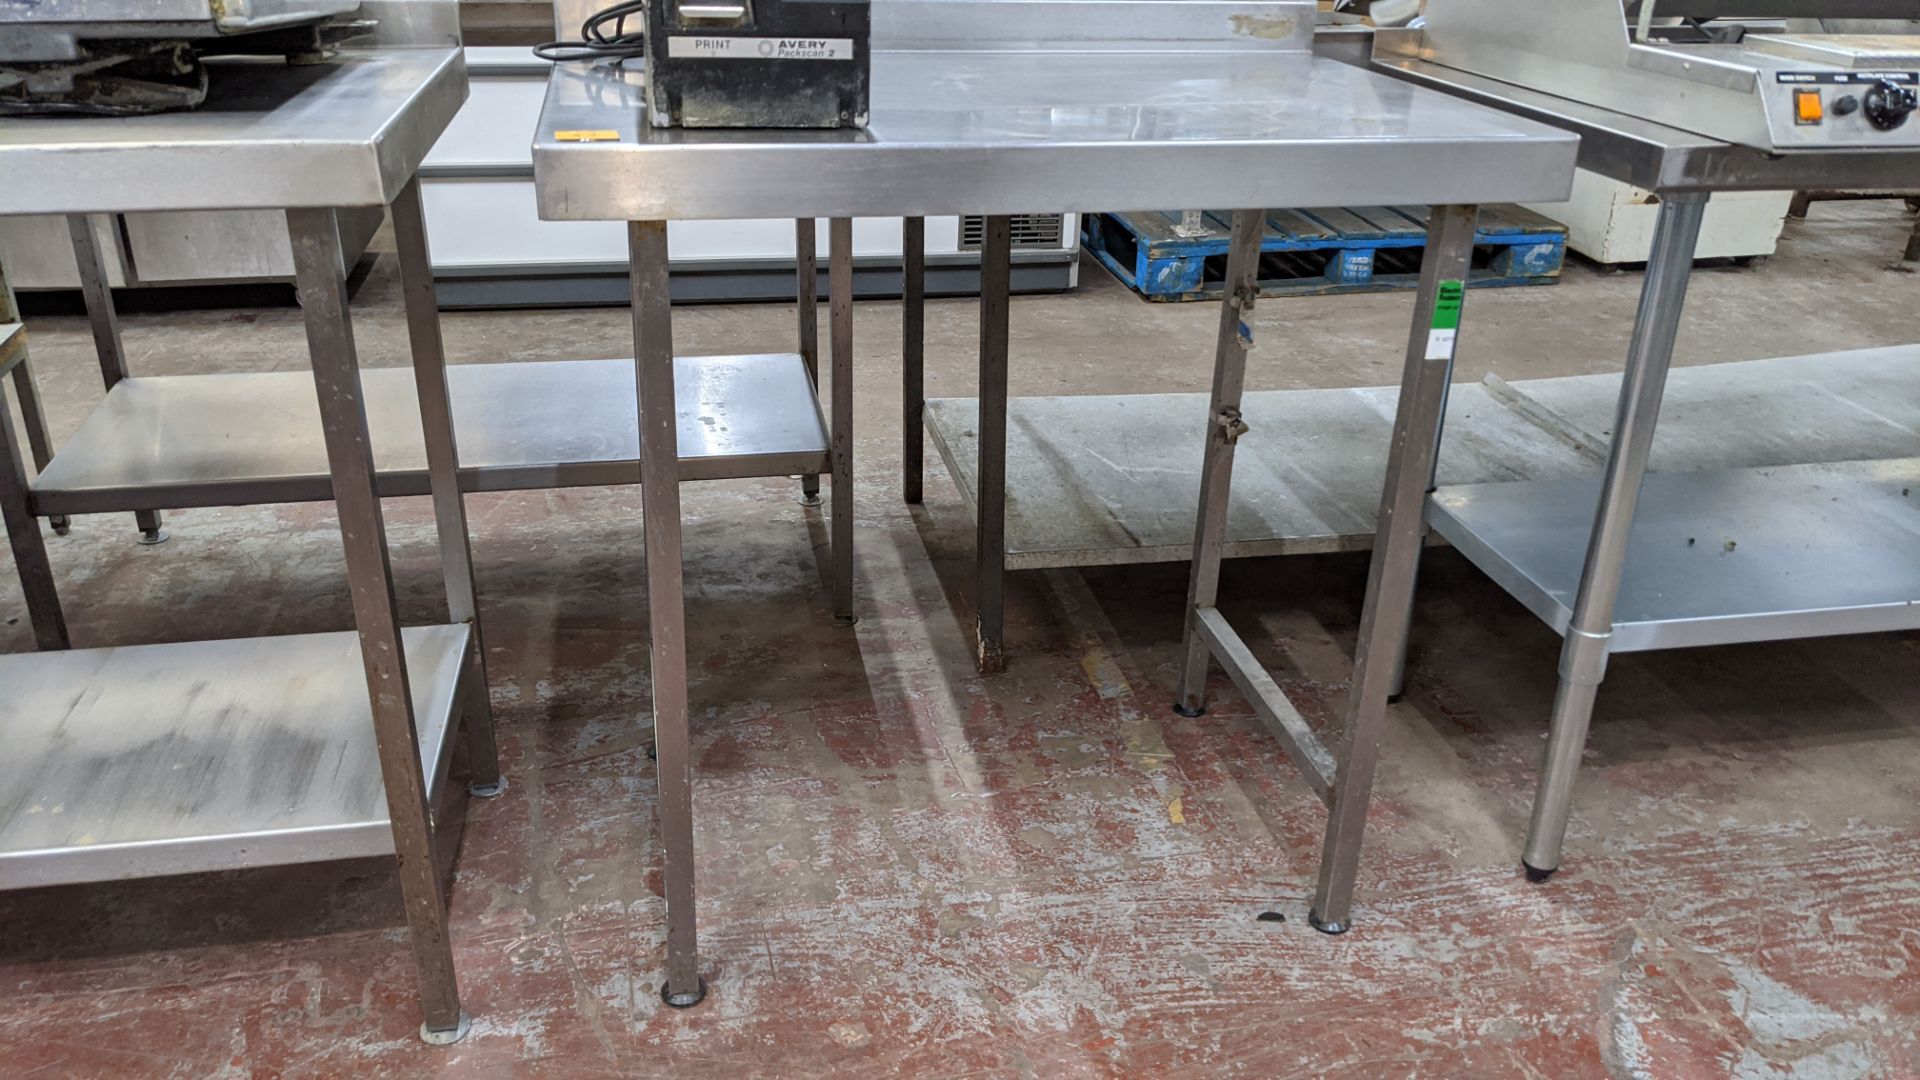 Stainless steel table, table top measuring approximately 900mm x 600mm - Image 2 of 3